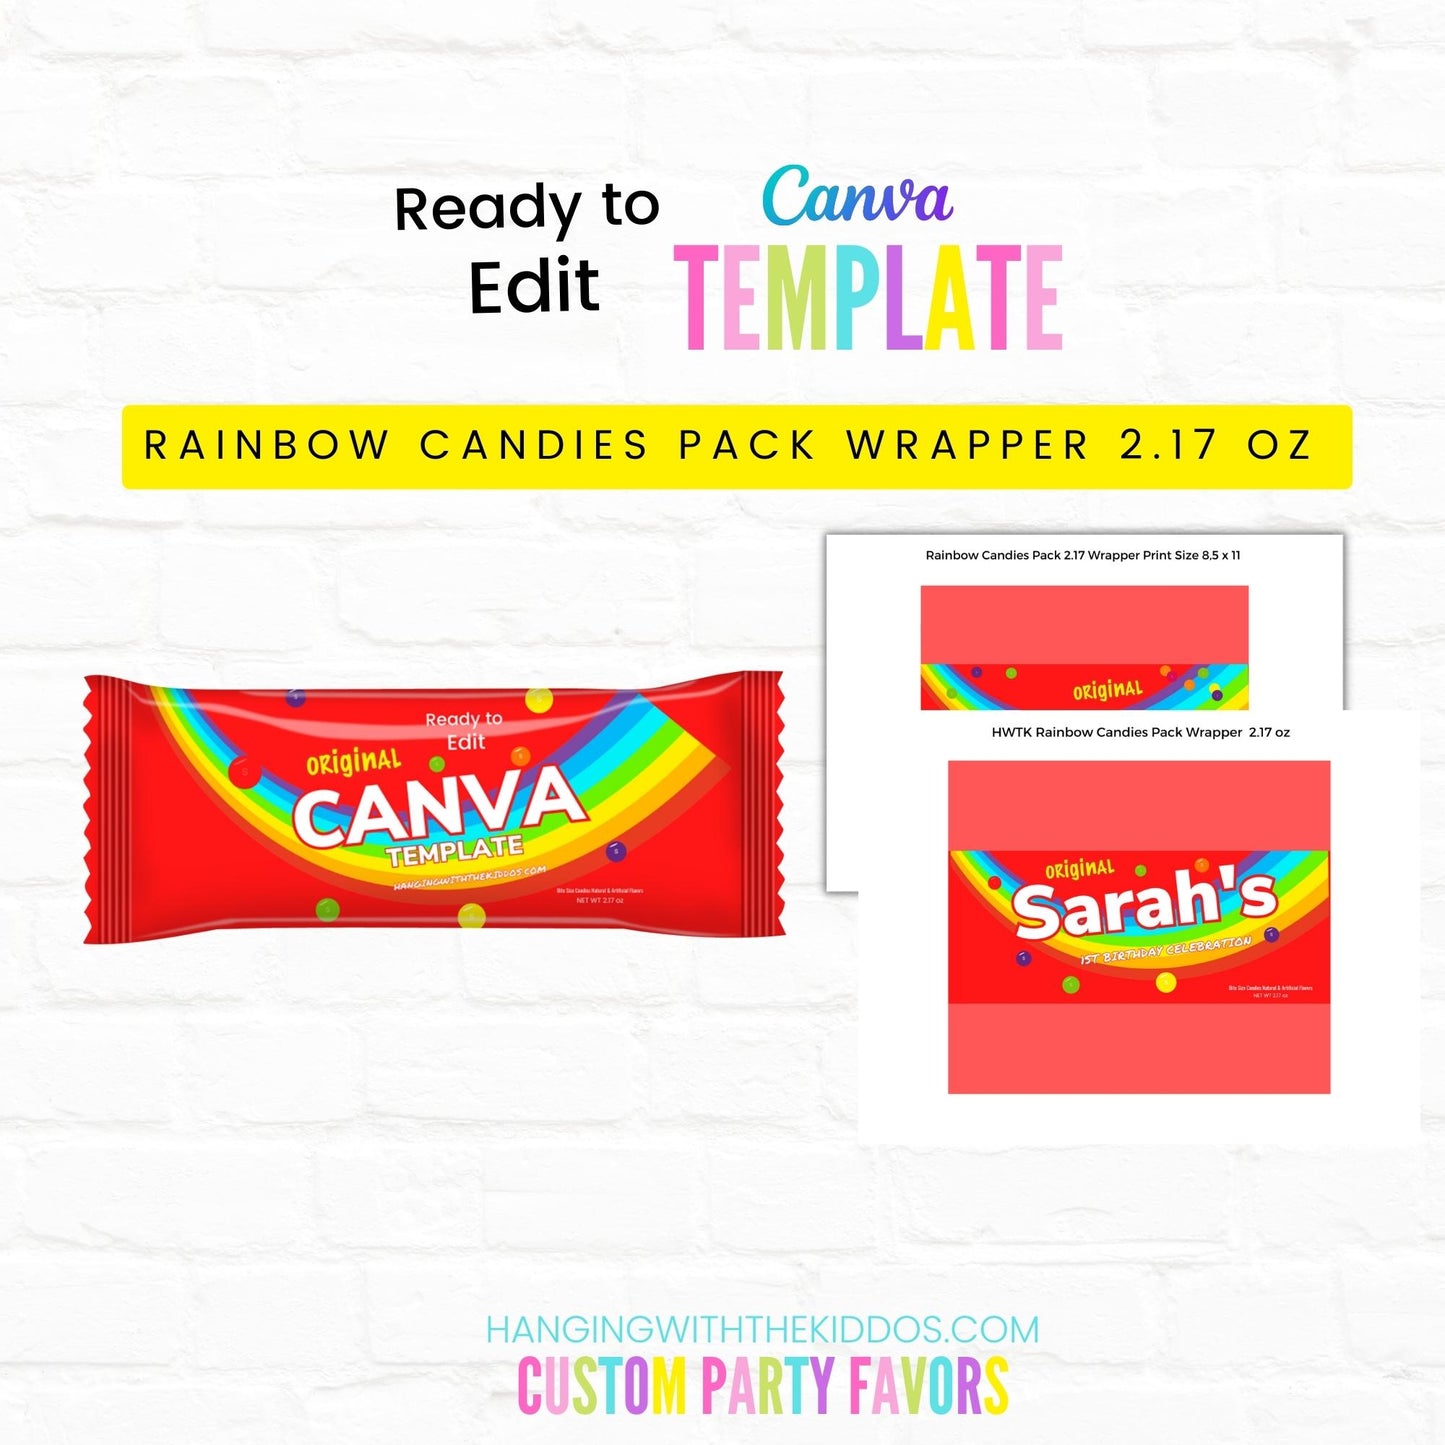 Rainbow Candies Pack Wrapper Template 2.17 oz